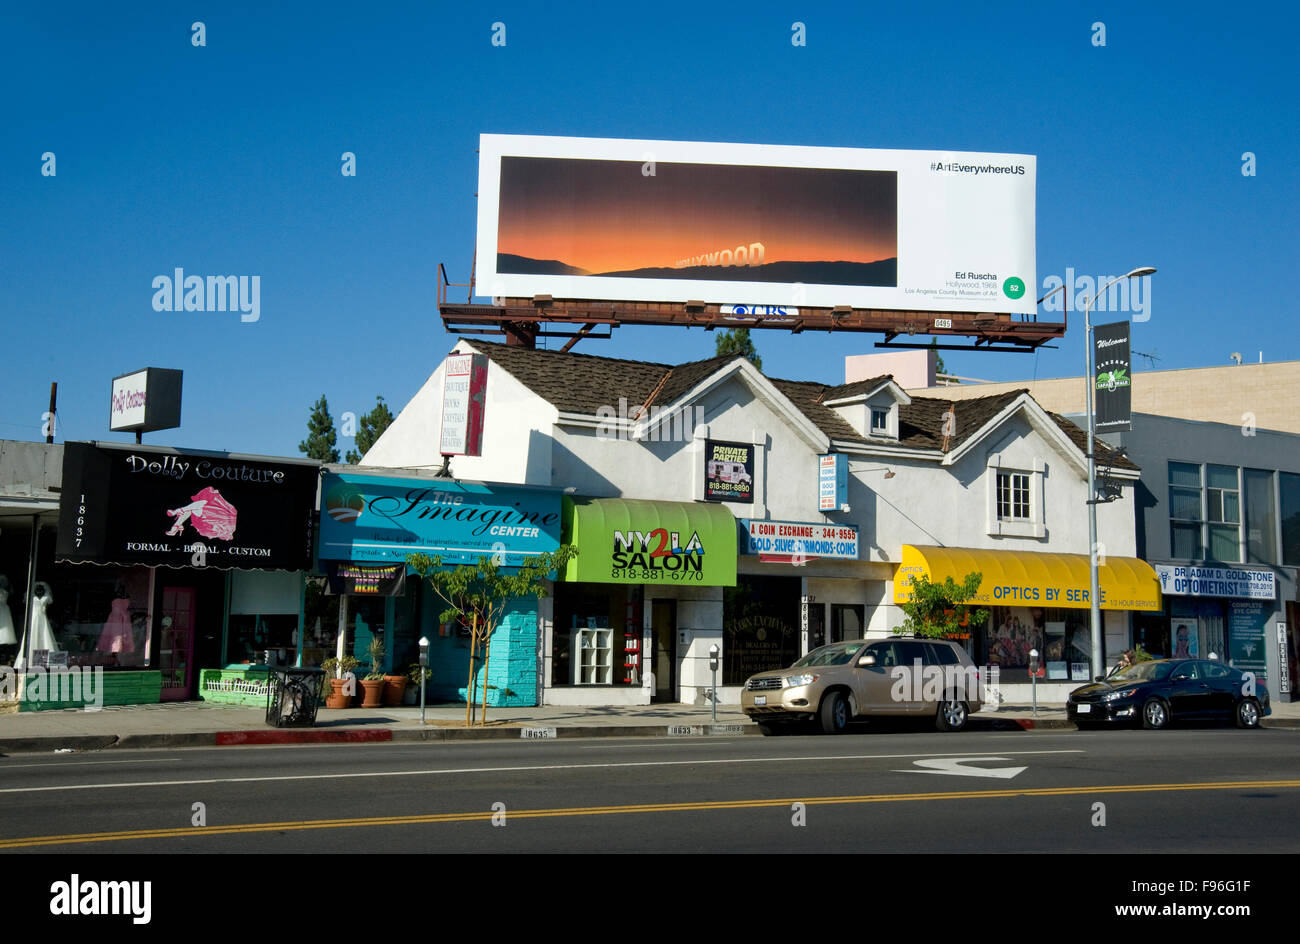 An Edward Ruscha fine art painting is reproduced on a billboard in Los Angeles, California during the Art Everywhere event. Stock Photo